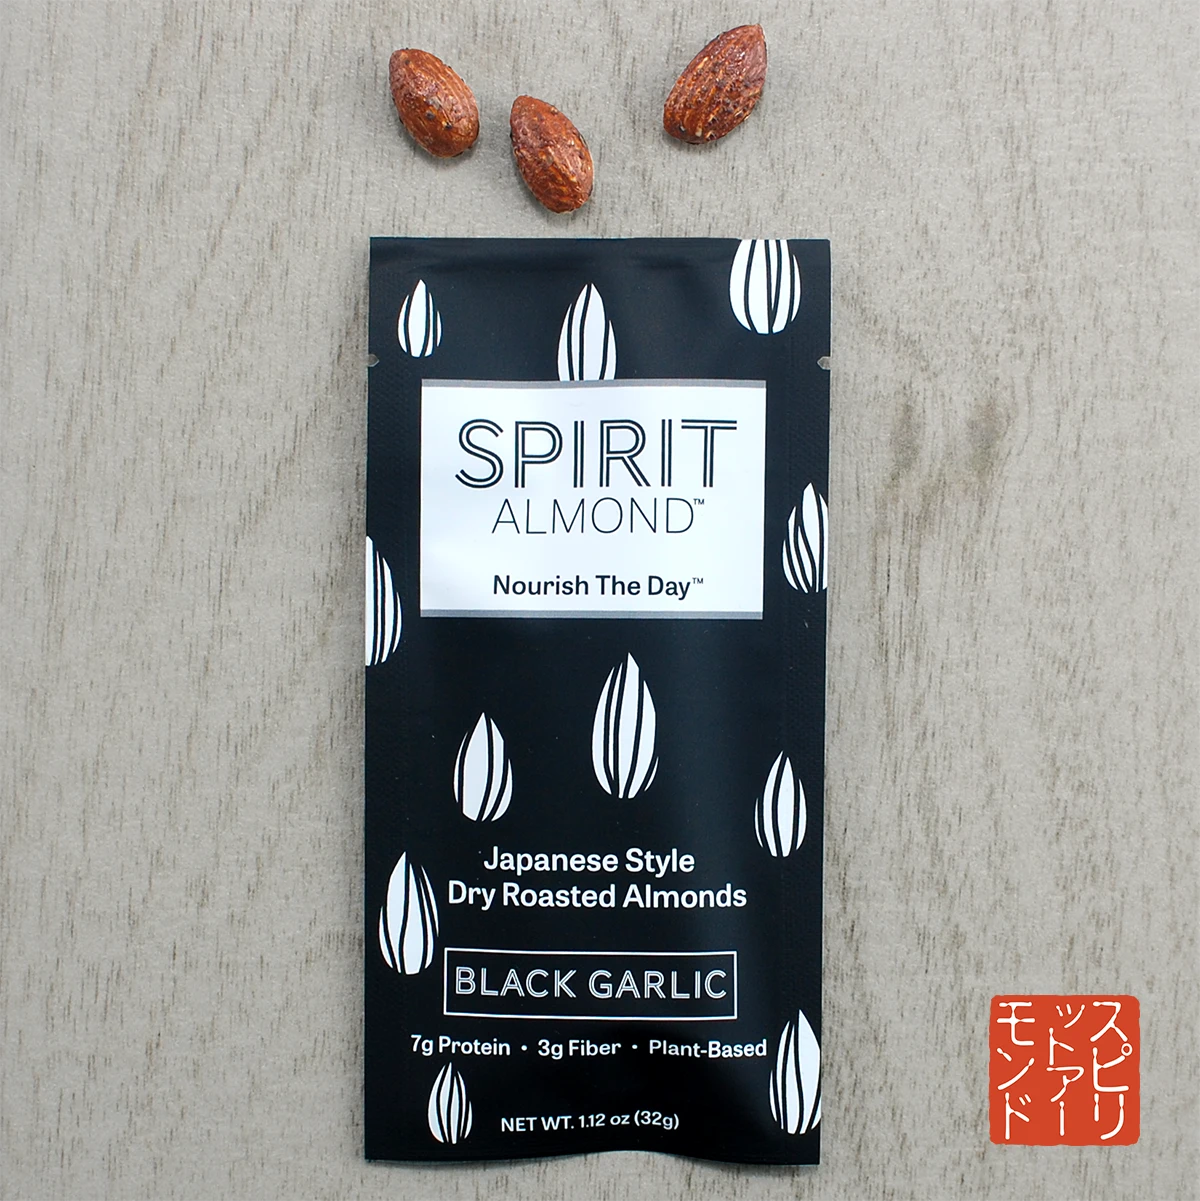 Package of SPIRIT Almond Black Garlic flavor, with a few almonds displayed